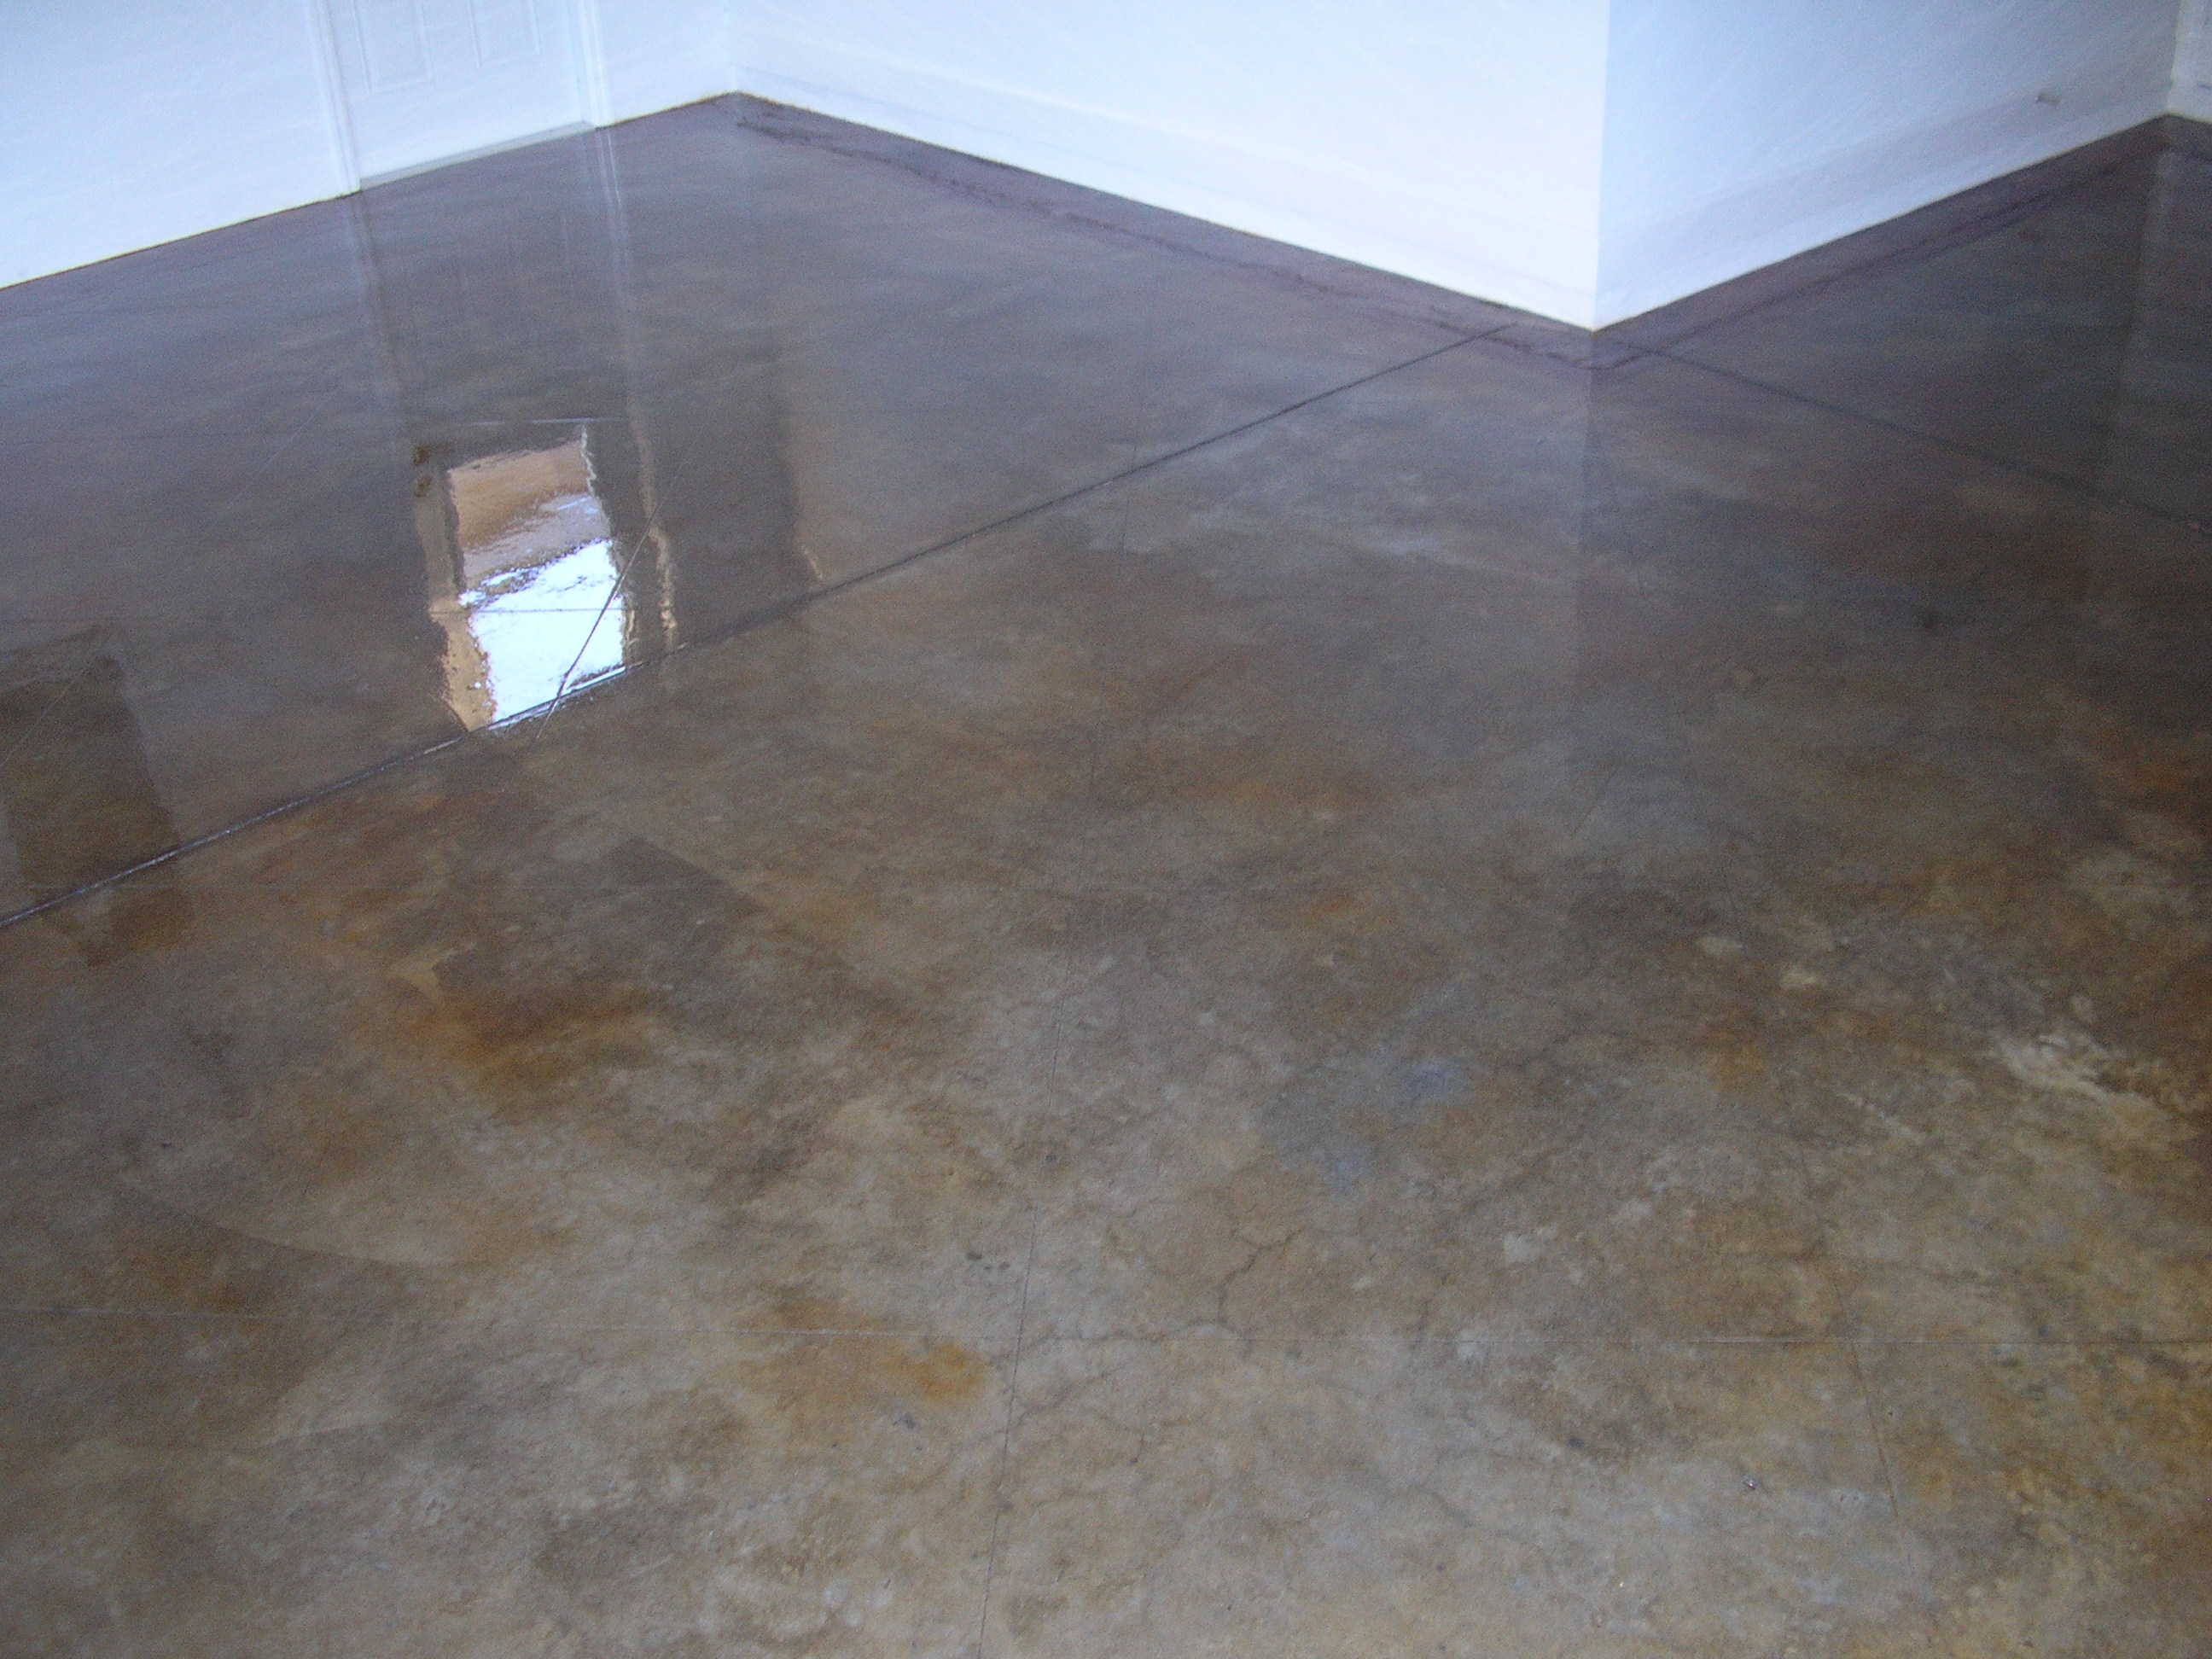 Decoration Painting Concrete Floor With Latex Paint Inside House ...